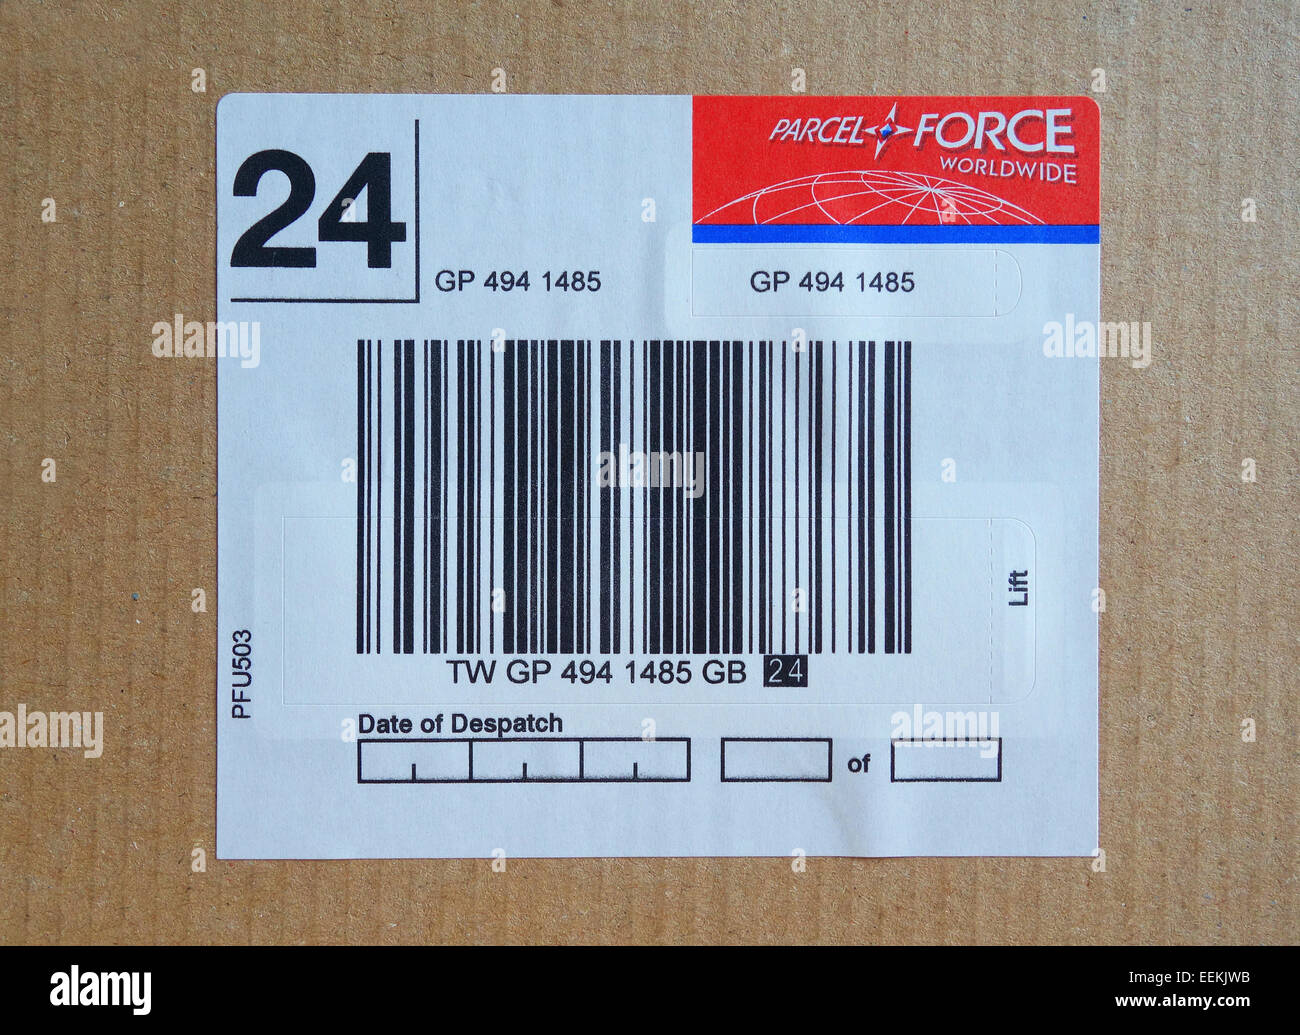 A Parcel Force bar code on package Stock Photo